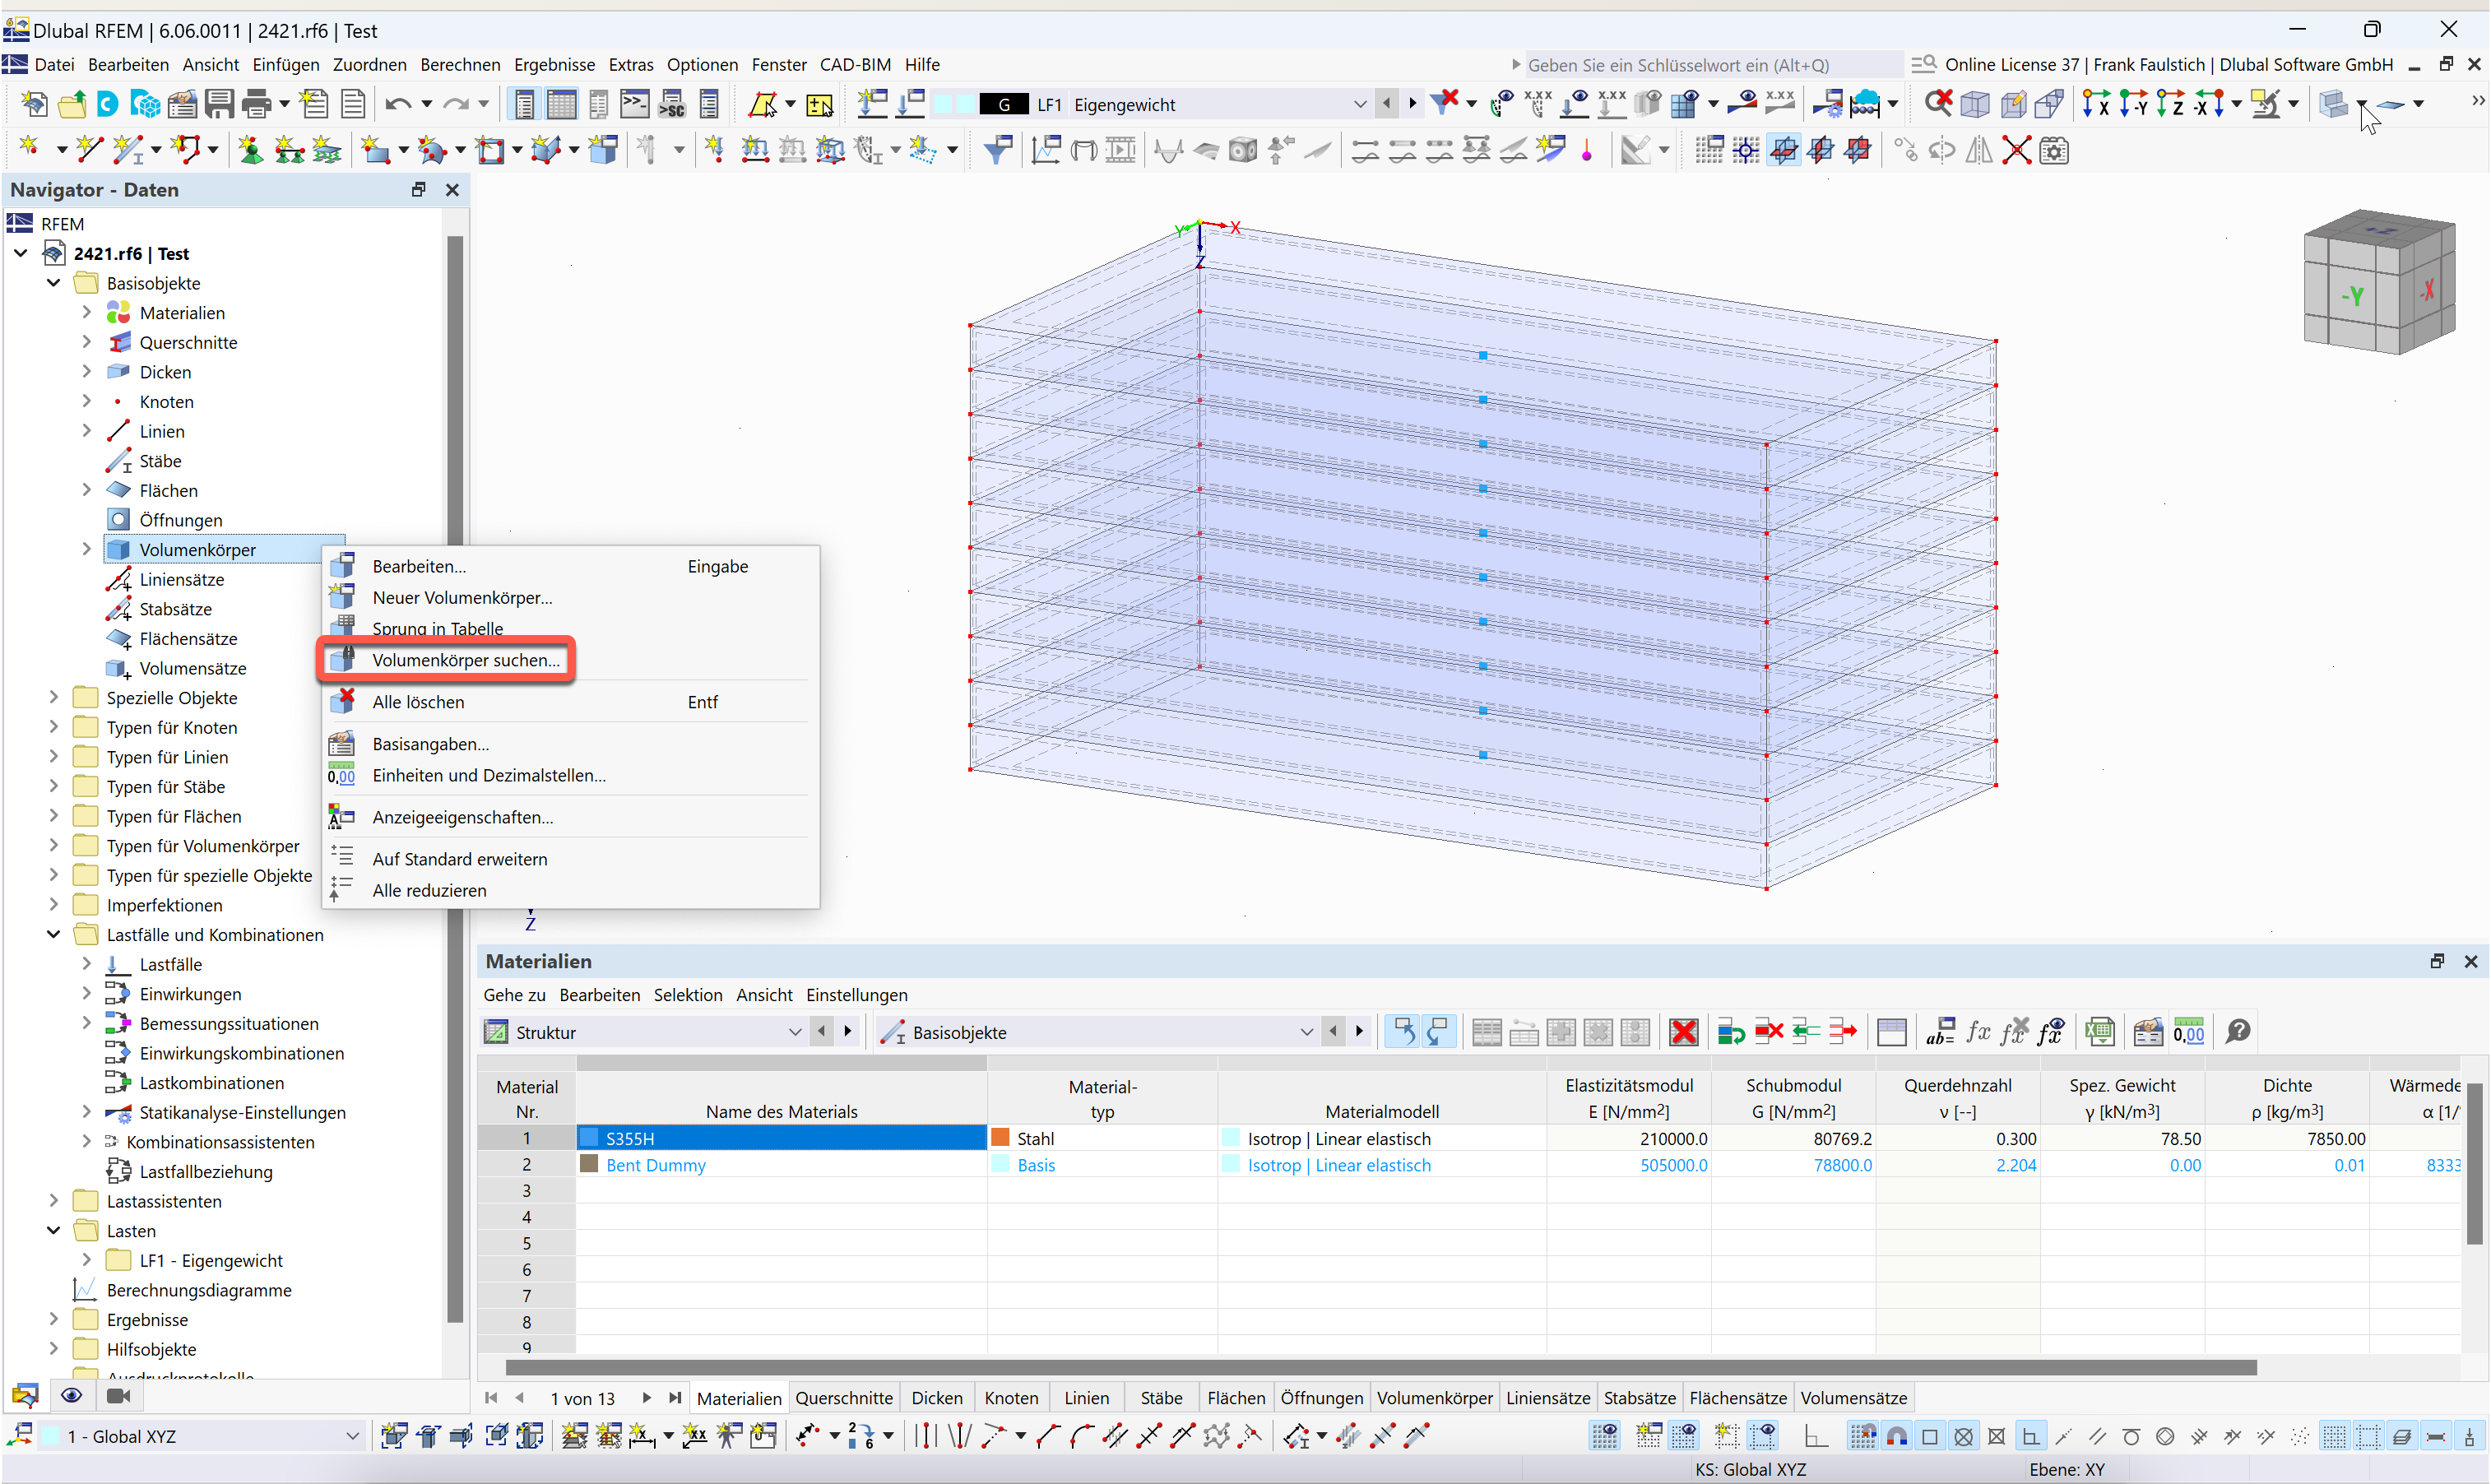 FAQ 005547 | How do I find a solid with a certain number in RFEM 6?